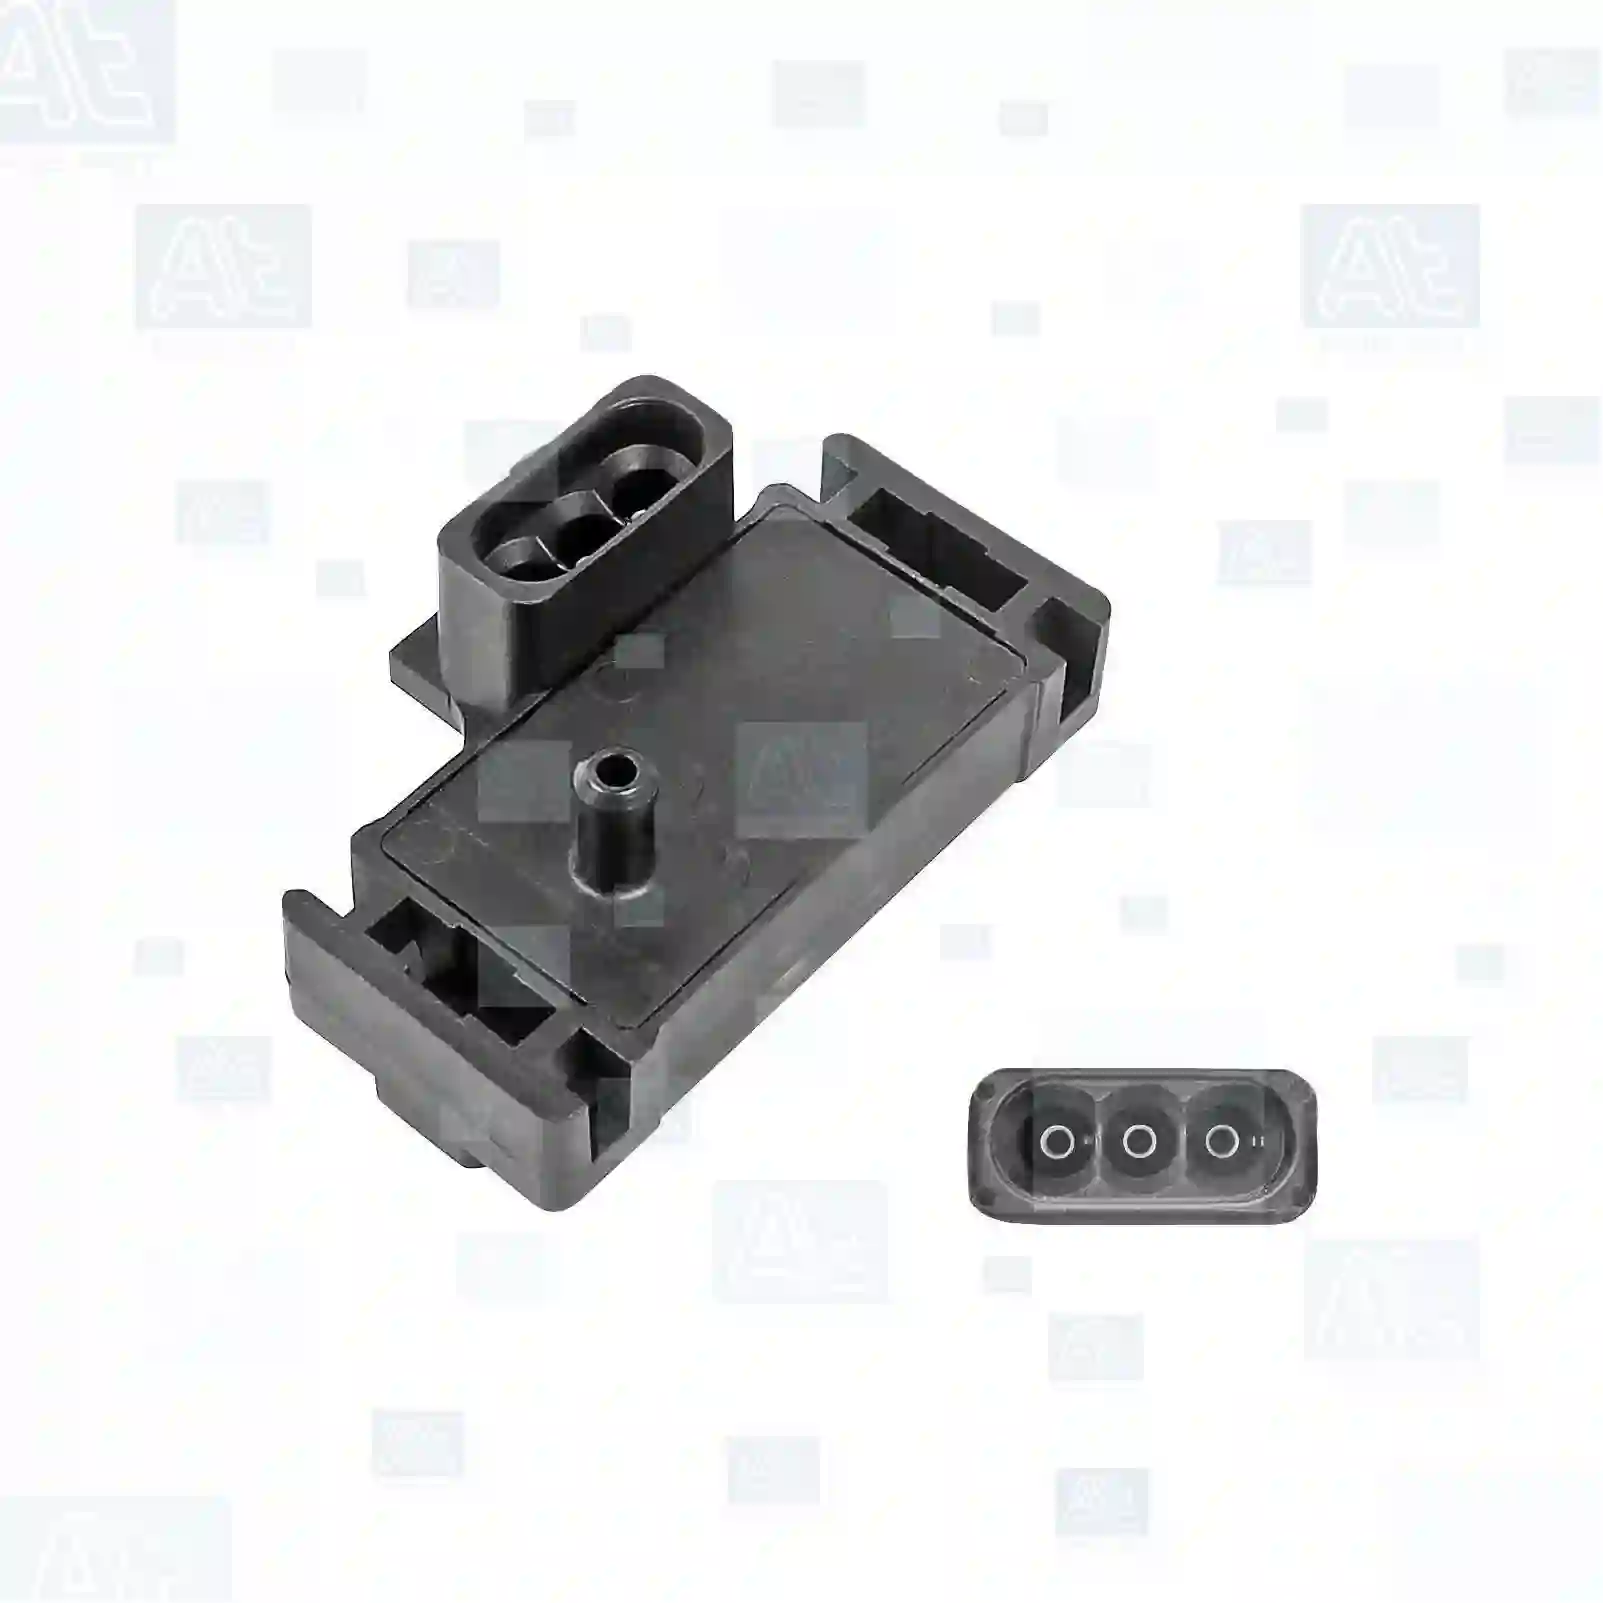 Vacuum sensor, intake manifold, at no 77710792, oem no: 05992408, 07696064, 60811534, 12569240, 16017460, 16137039, 16158055, 16254719, 17112715, 21020103, 95047198, 33000153, 33000273, 5234313, 8933000153, 8933000273, 19204S, 1920FC, 564609, 594607, 594609, 16137039, 95047198, 05992408, 07696064, 60811534, 1144809, 1C1Y-9F479-AA, 1238788, 12569240, 12589240, 16017460, 16137039, 16158055, 16254719, 17112715, 21020103, 6238927, 9389131, 16017460, 16137039, 8161370390, 39330-24750, 39333-22032, 8-16017460-0, 8-16137039-0, 8-16158055-0, 33000153, 33000273, 5234313, 8933000153, 0K950-18211, 05992408, 07696064, 60811534, 0235454532, 1238788, 6238927, 857701, 19204S, 1920FC, 564609, 594607, 594609, 7700706876, 8933000153, 8933000273, 1378162, 31303211, 3411400 At Spare Part | Engine, Accelerator Pedal, Camshaft, Connecting Rod, Crankcase, Crankshaft, Cylinder Head, Engine Suspension Mountings, Exhaust Manifold, Exhaust Gas Recirculation, Filter Kits, Flywheel Housing, General Overhaul Kits, Engine, Intake Manifold, Oil Cleaner, Oil Cooler, Oil Filter, Oil Pump, Oil Sump, Piston & Liner, Sensor & Switch, Timing Case, Turbocharger, Cooling System, Belt Tensioner, Coolant Filter, Coolant Pipe, Corrosion Prevention Agent, Drive, Expansion Tank, Fan, Intercooler, Monitors & Gauges, Radiator, Thermostat, V-Belt / Timing belt, Water Pump, Fuel System, Electronical Injector Unit, Feed Pump, Fuel Filter, cpl., Fuel Gauge Sender,  Fuel Line, Fuel Pump, Fuel Tank, Injection Line Kit, Injection Pump, Exhaust System, Clutch & Pedal, Gearbox, Propeller Shaft, Axles, Brake System, Hubs & Wheels, Suspension, Leaf Spring, Universal Parts / Accessories, Steering, Electrical System, Cabin Vacuum sensor, intake manifold, at no 77710792, oem no: 05992408, 07696064, 60811534, 12569240, 16017460, 16137039, 16158055, 16254719, 17112715, 21020103, 95047198, 33000153, 33000273, 5234313, 8933000153, 8933000273, 19204S, 1920FC, 564609, 594607, 594609, 16137039, 95047198, 05992408, 07696064, 60811534, 1144809, 1C1Y-9F479-AA, 1238788, 12569240, 12589240, 16017460, 16137039, 16158055, 16254719, 17112715, 21020103, 6238927, 9389131, 16017460, 16137039, 8161370390, 39330-24750, 39333-22032, 8-16017460-0, 8-16137039-0, 8-16158055-0, 33000153, 33000273, 5234313, 8933000153, 0K950-18211, 05992408, 07696064, 60811534, 0235454532, 1238788, 6238927, 857701, 19204S, 1920FC, 564609, 594607, 594609, 7700706876, 8933000153, 8933000273, 1378162, 31303211, 3411400 At Spare Part | Engine, Accelerator Pedal, Camshaft, Connecting Rod, Crankcase, Crankshaft, Cylinder Head, Engine Suspension Mountings, Exhaust Manifold, Exhaust Gas Recirculation, Filter Kits, Flywheel Housing, General Overhaul Kits, Engine, Intake Manifold, Oil Cleaner, Oil Cooler, Oil Filter, Oil Pump, Oil Sump, Piston & Liner, Sensor & Switch, Timing Case, Turbocharger, Cooling System, Belt Tensioner, Coolant Filter, Coolant Pipe, Corrosion Prevention Agent, Drive, Expansion Tank, Fan, Intercooler, Monitors & Gauges, Radiator, Thermostat, V-Belt / Timing belt, Water Pump, Fuel System, Electronical Injector Unit, Feed Pump, Fuel Filter, cpl., Fuel Gauge Sender,  Fuel Line, Fuel Pump, Fuel Tank, Injection Line Kit, Injection Pump, Exhaust System, Clutch & Pedal, Gearbox, Propeller Shaft, Axles, Brake System, Hubs & Wheels, Suspension, Leaf Spring, Universal Parts / Accessories, Steering, Electrical System, Cabin